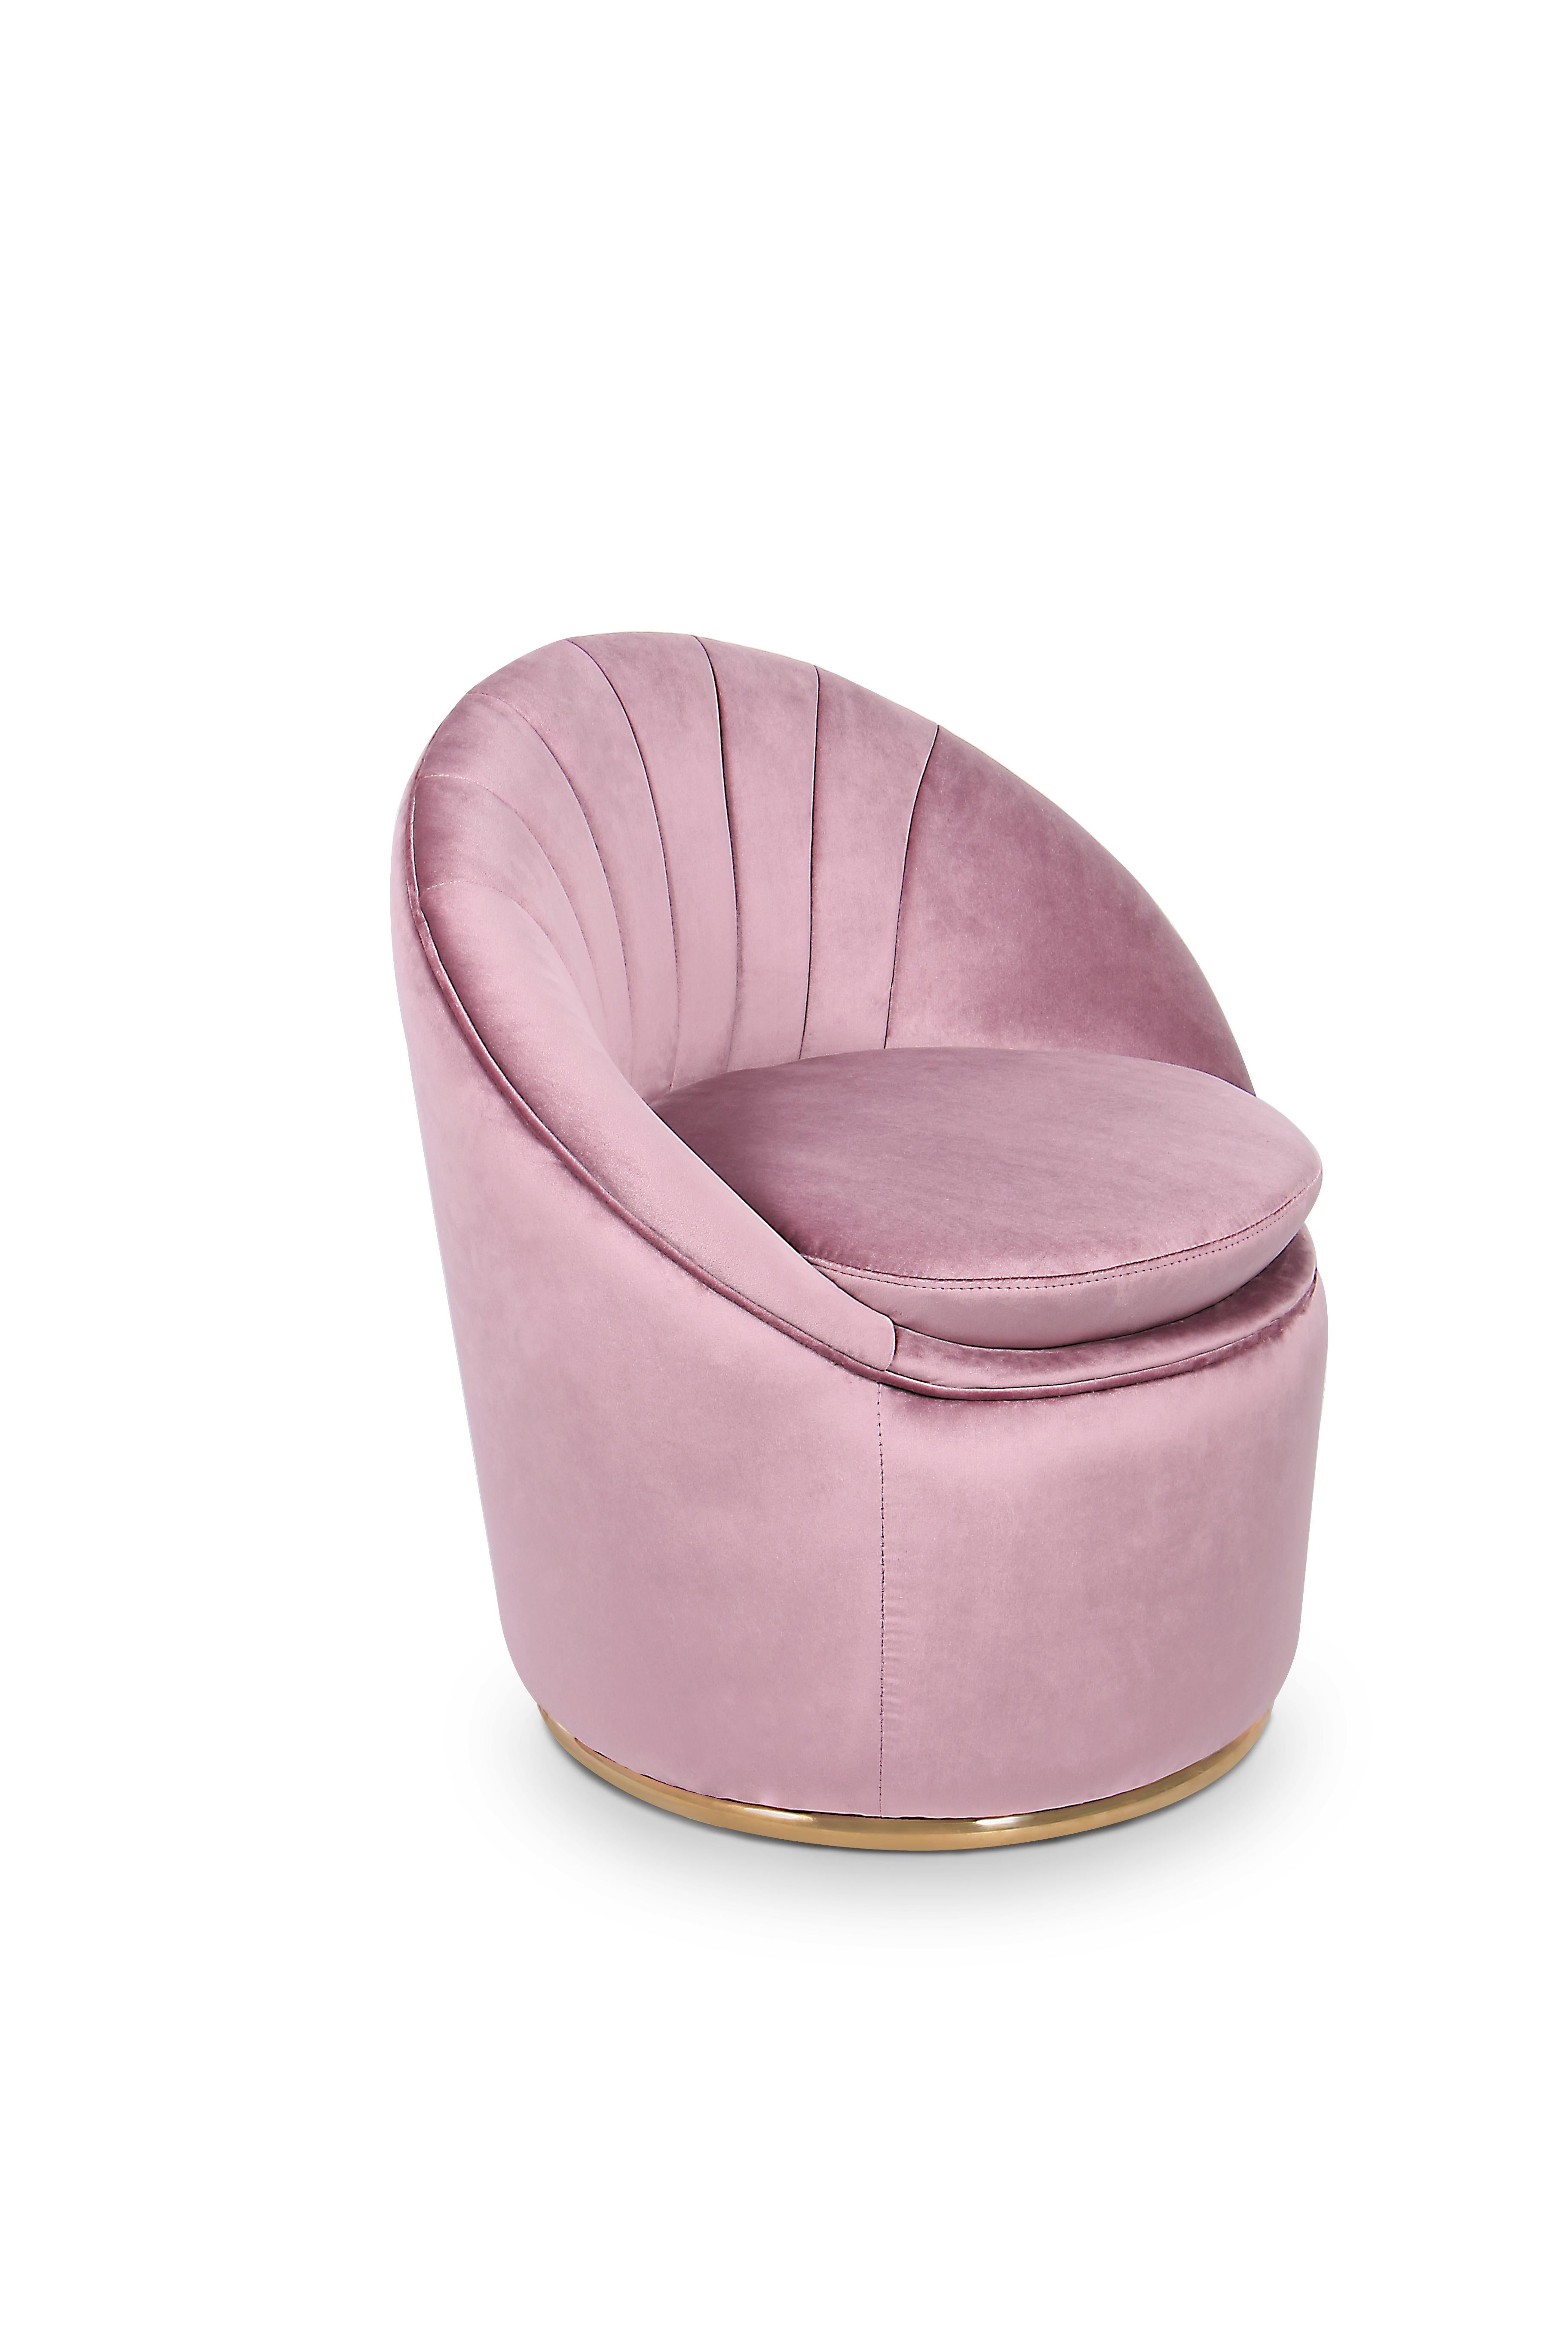 Inspired by the seductive movements of the iconic movie star Marilyn Monroe, this crescent accent chair is an elegant and retro chic piece of furniture inspired in the 60's design legacy. It is fully upholstered in velvet and has a brass trim on the